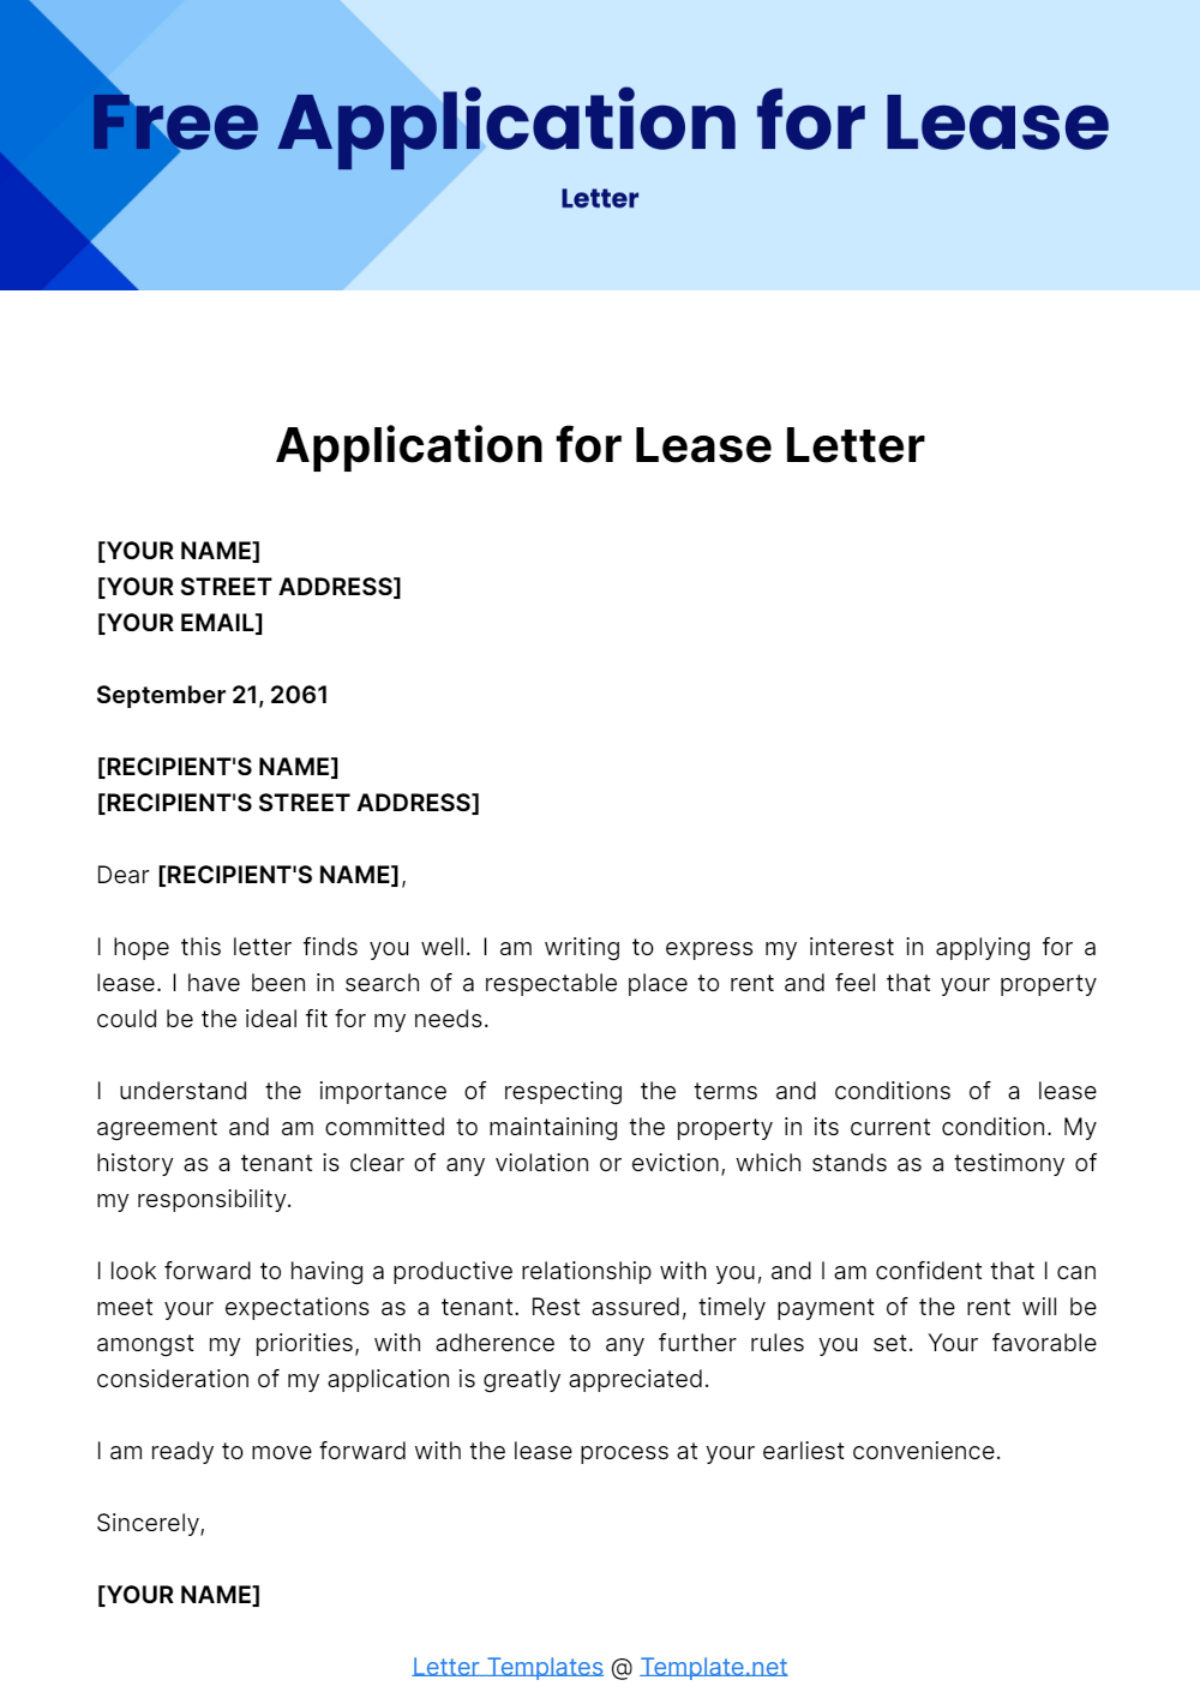 Free Application for Lease Letter Template